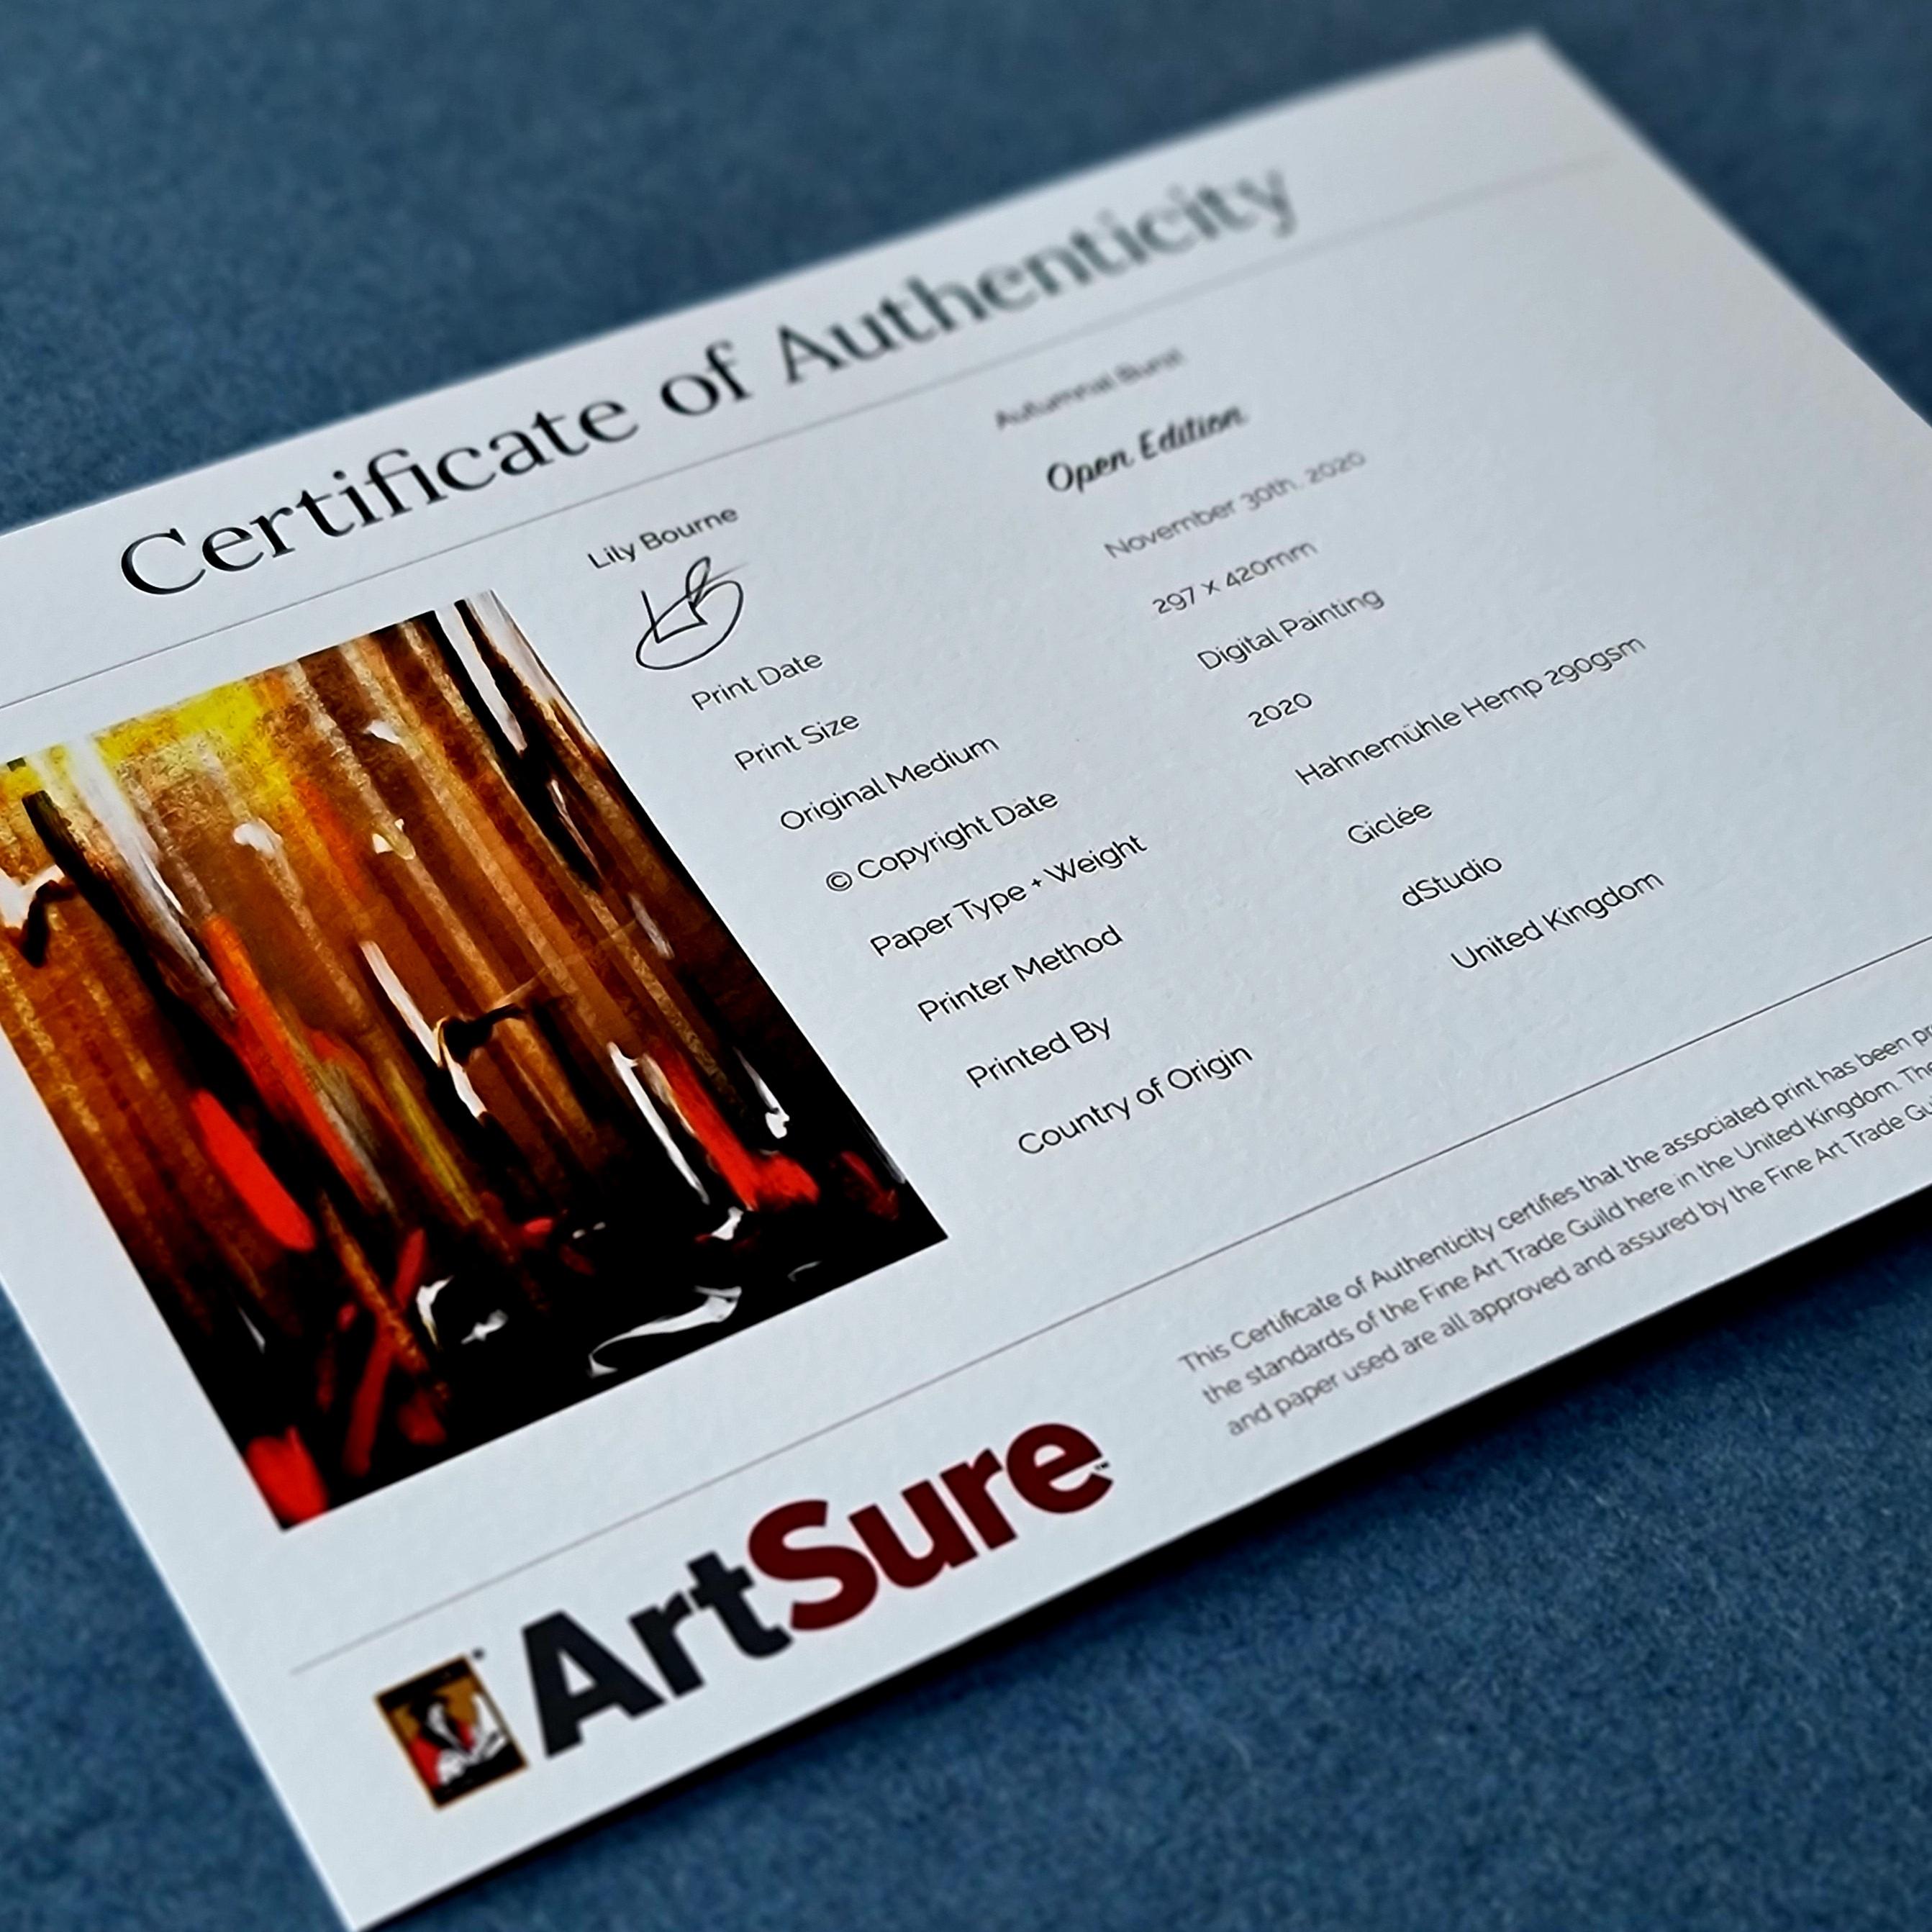 Example of certificate of authenticity.